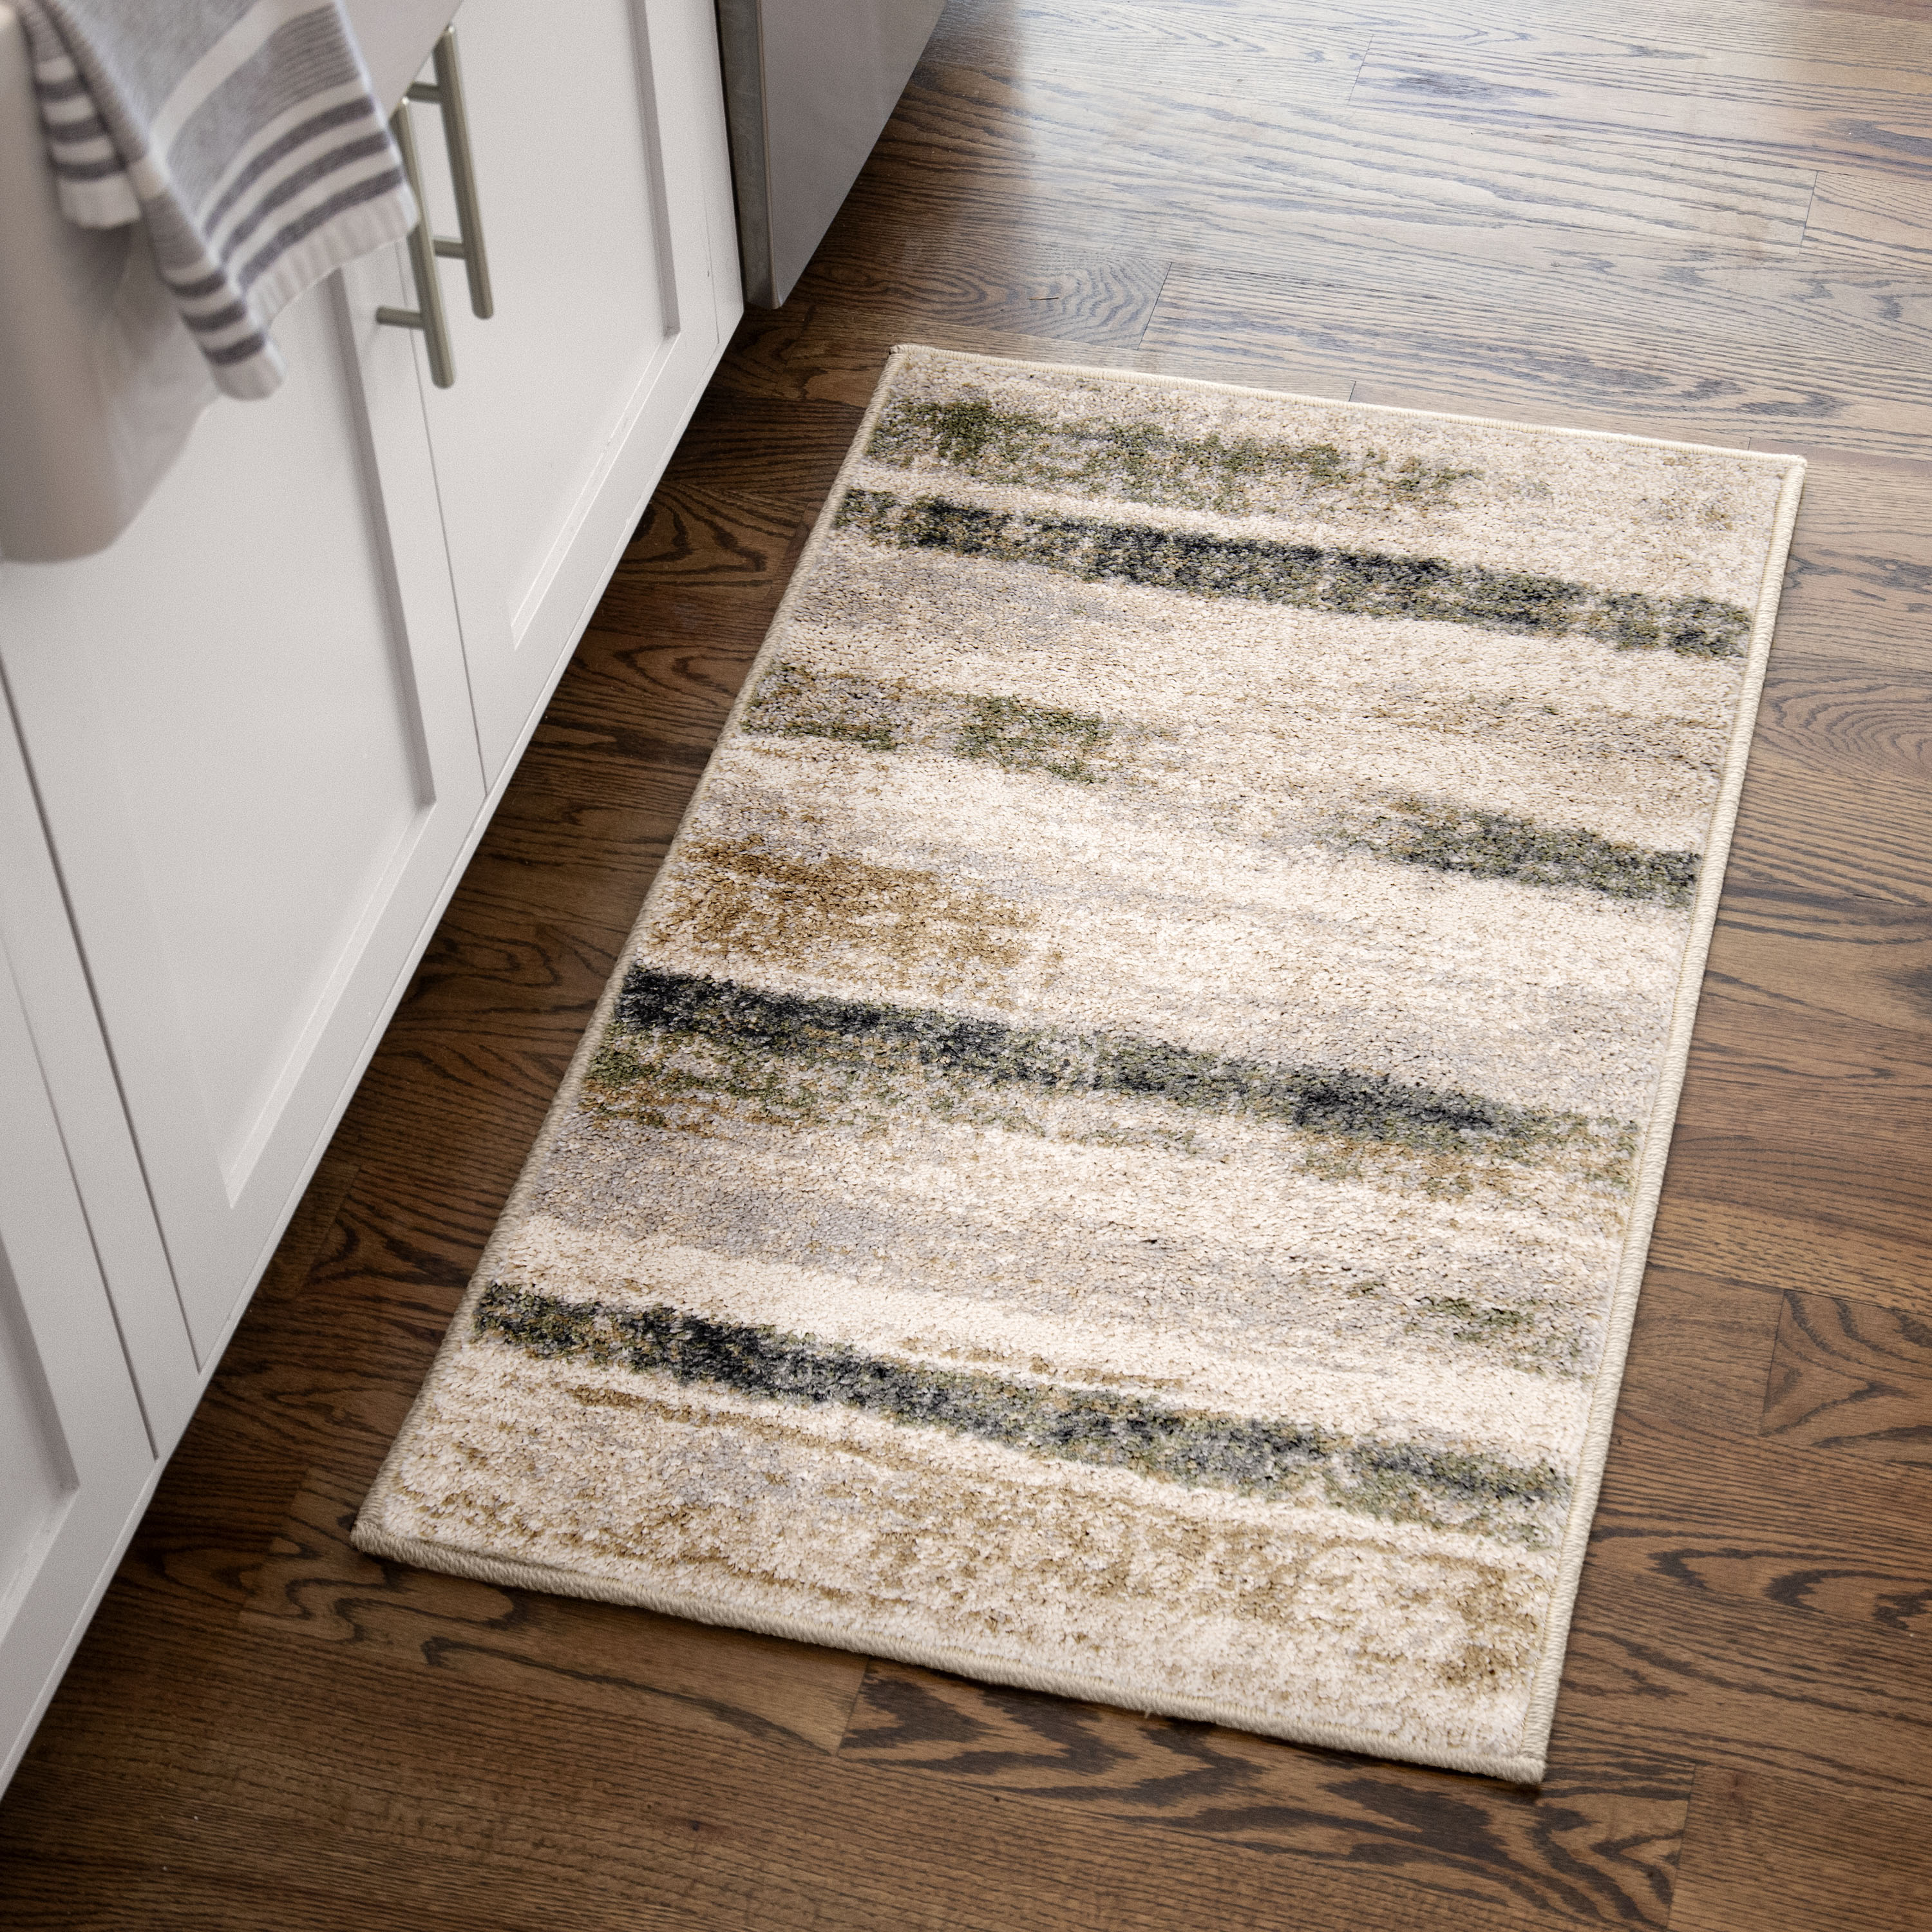 Performa Kitchen Drainage Mat. Connect Multiple Mats.